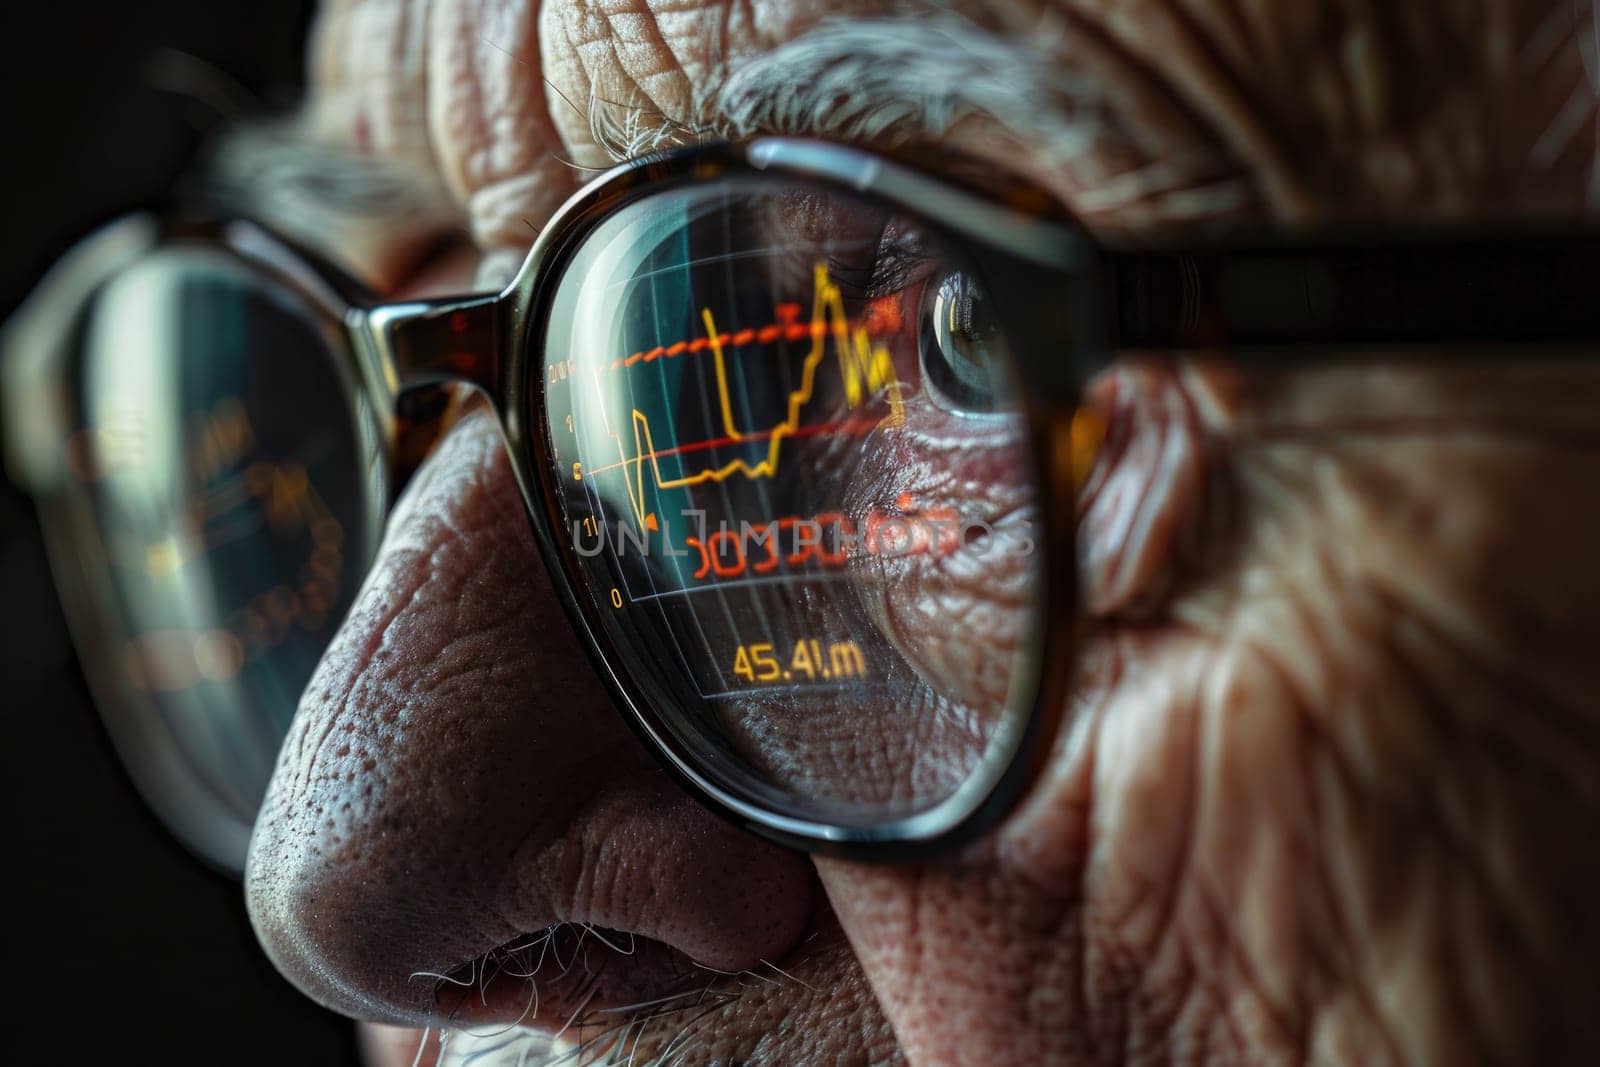 Senior man face, with a reflection of graphs and numbers in their glasses, symbolizing inventory management